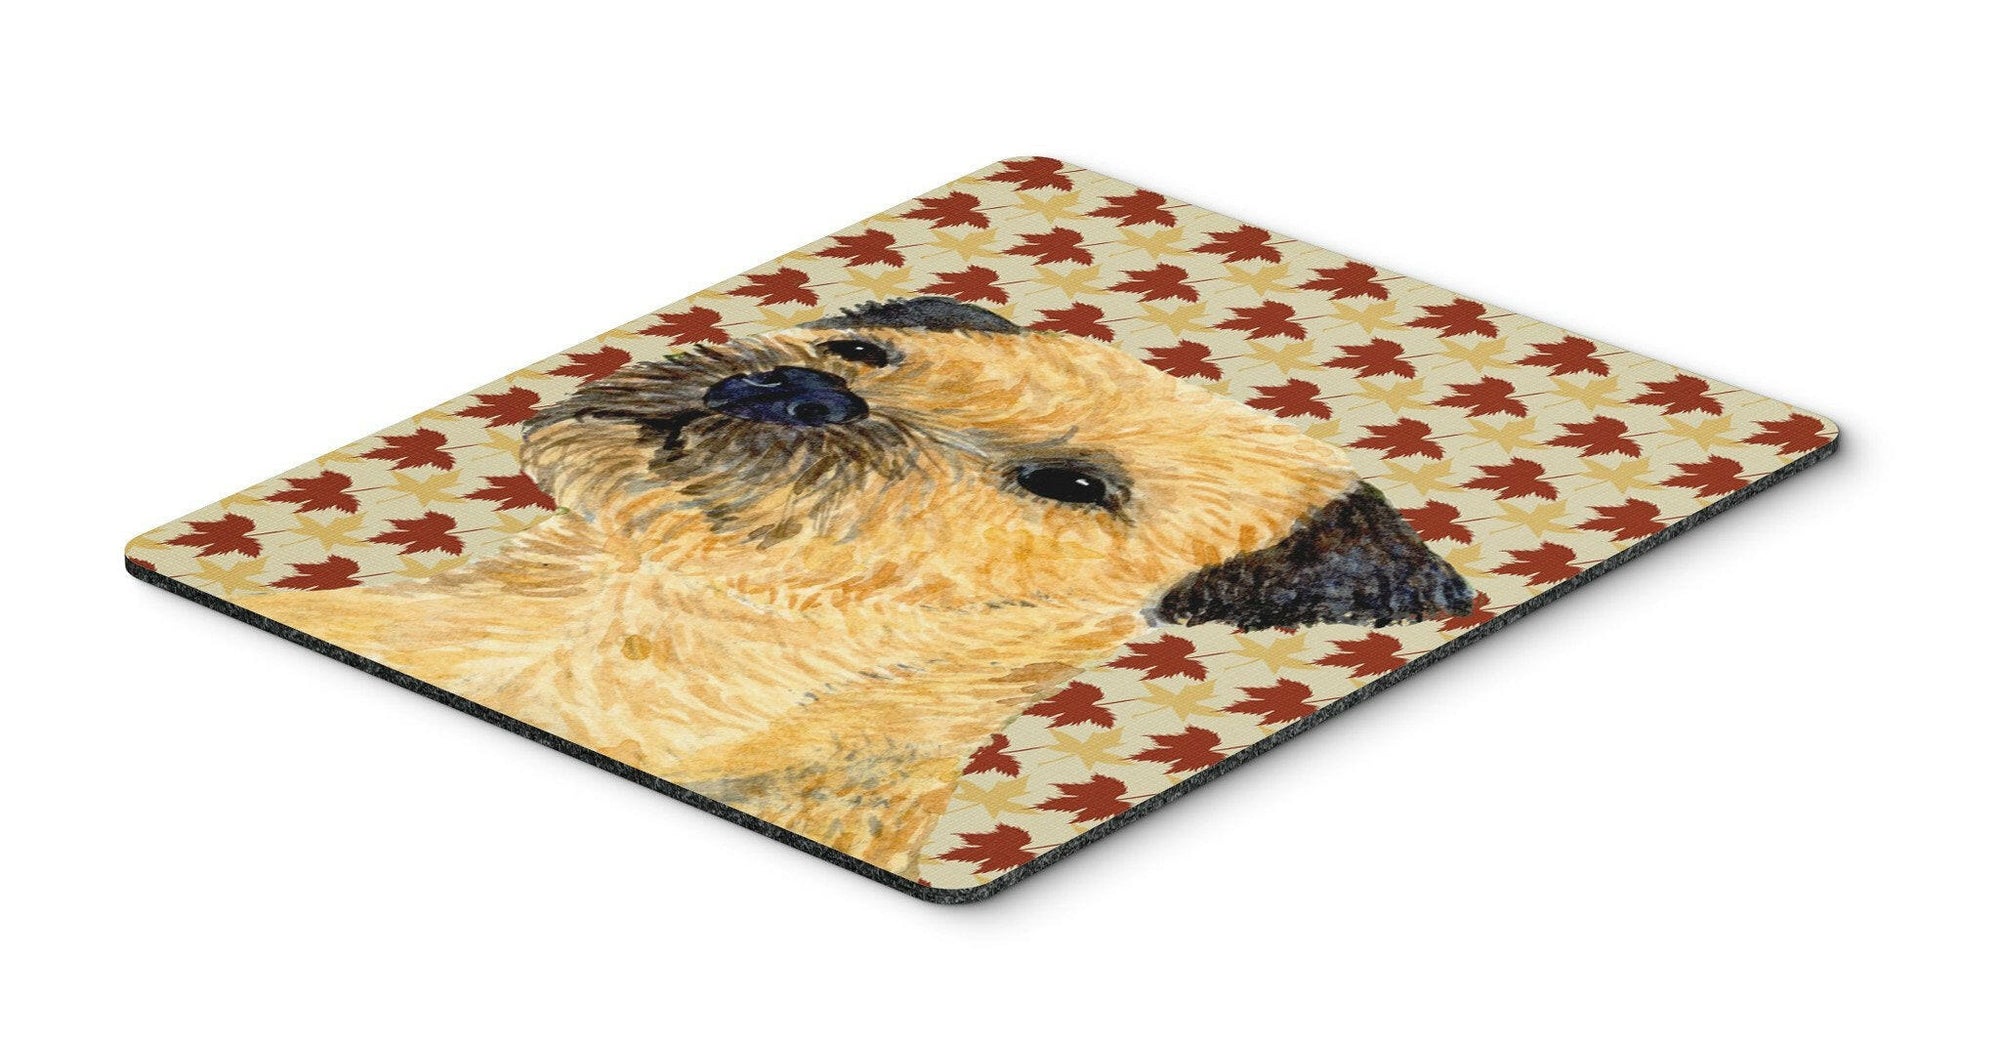 Border Terrier Fall Leaves Portrait Mouse Pad, Hot Pad or Trivet by Caroline's Treasures